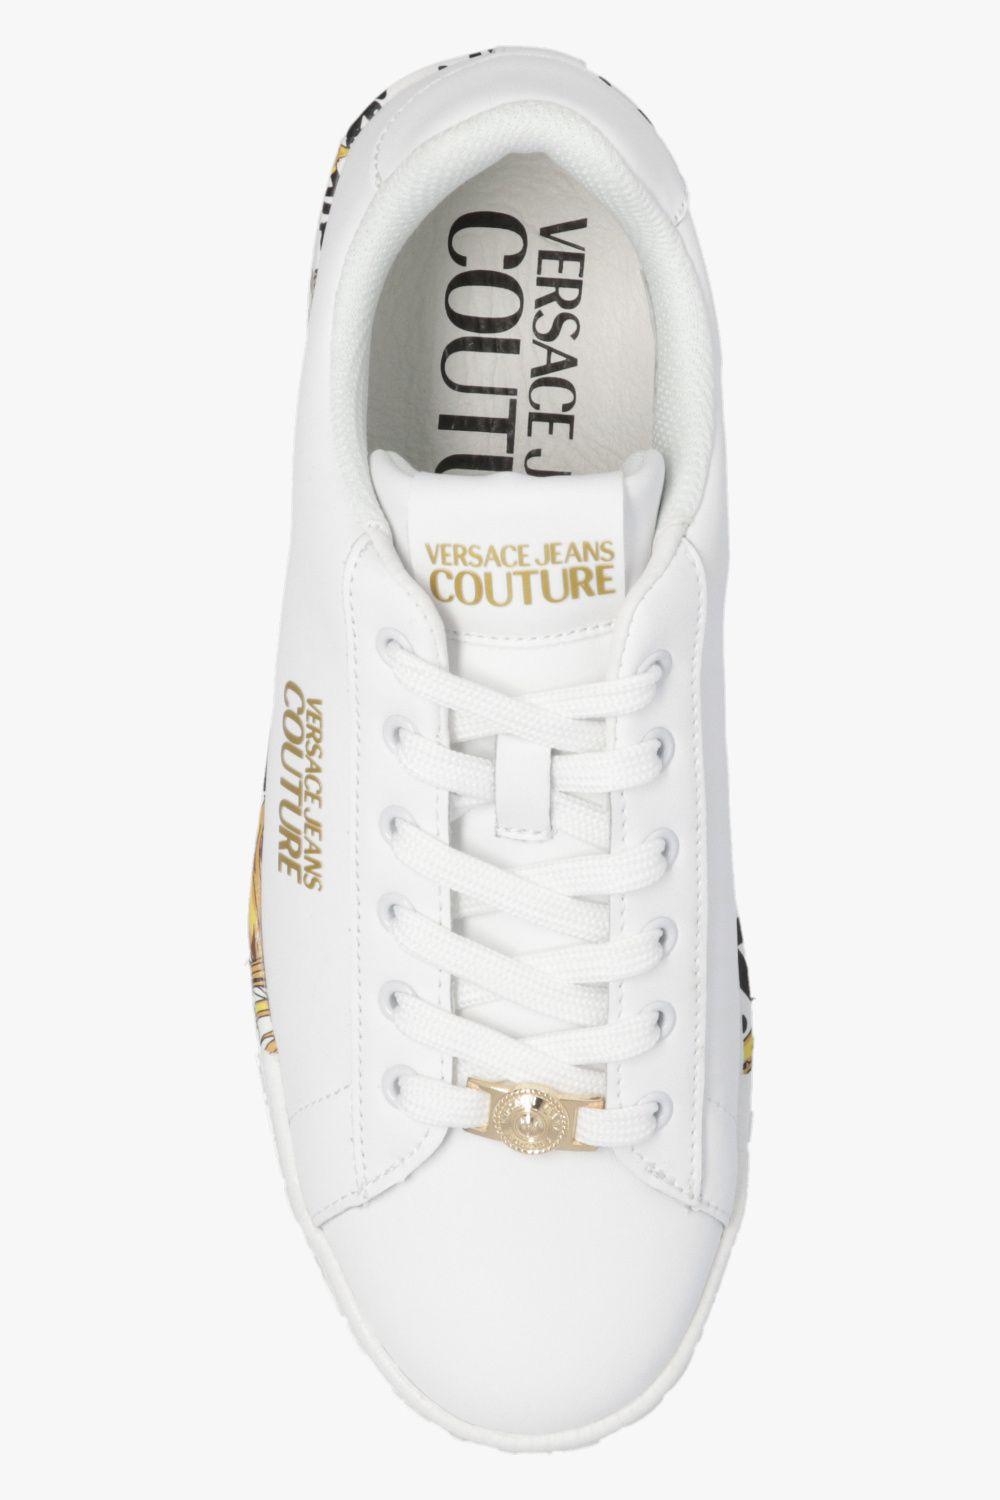 Versace Jeans Couture White Speedtrack Sneakers - ShopStyle